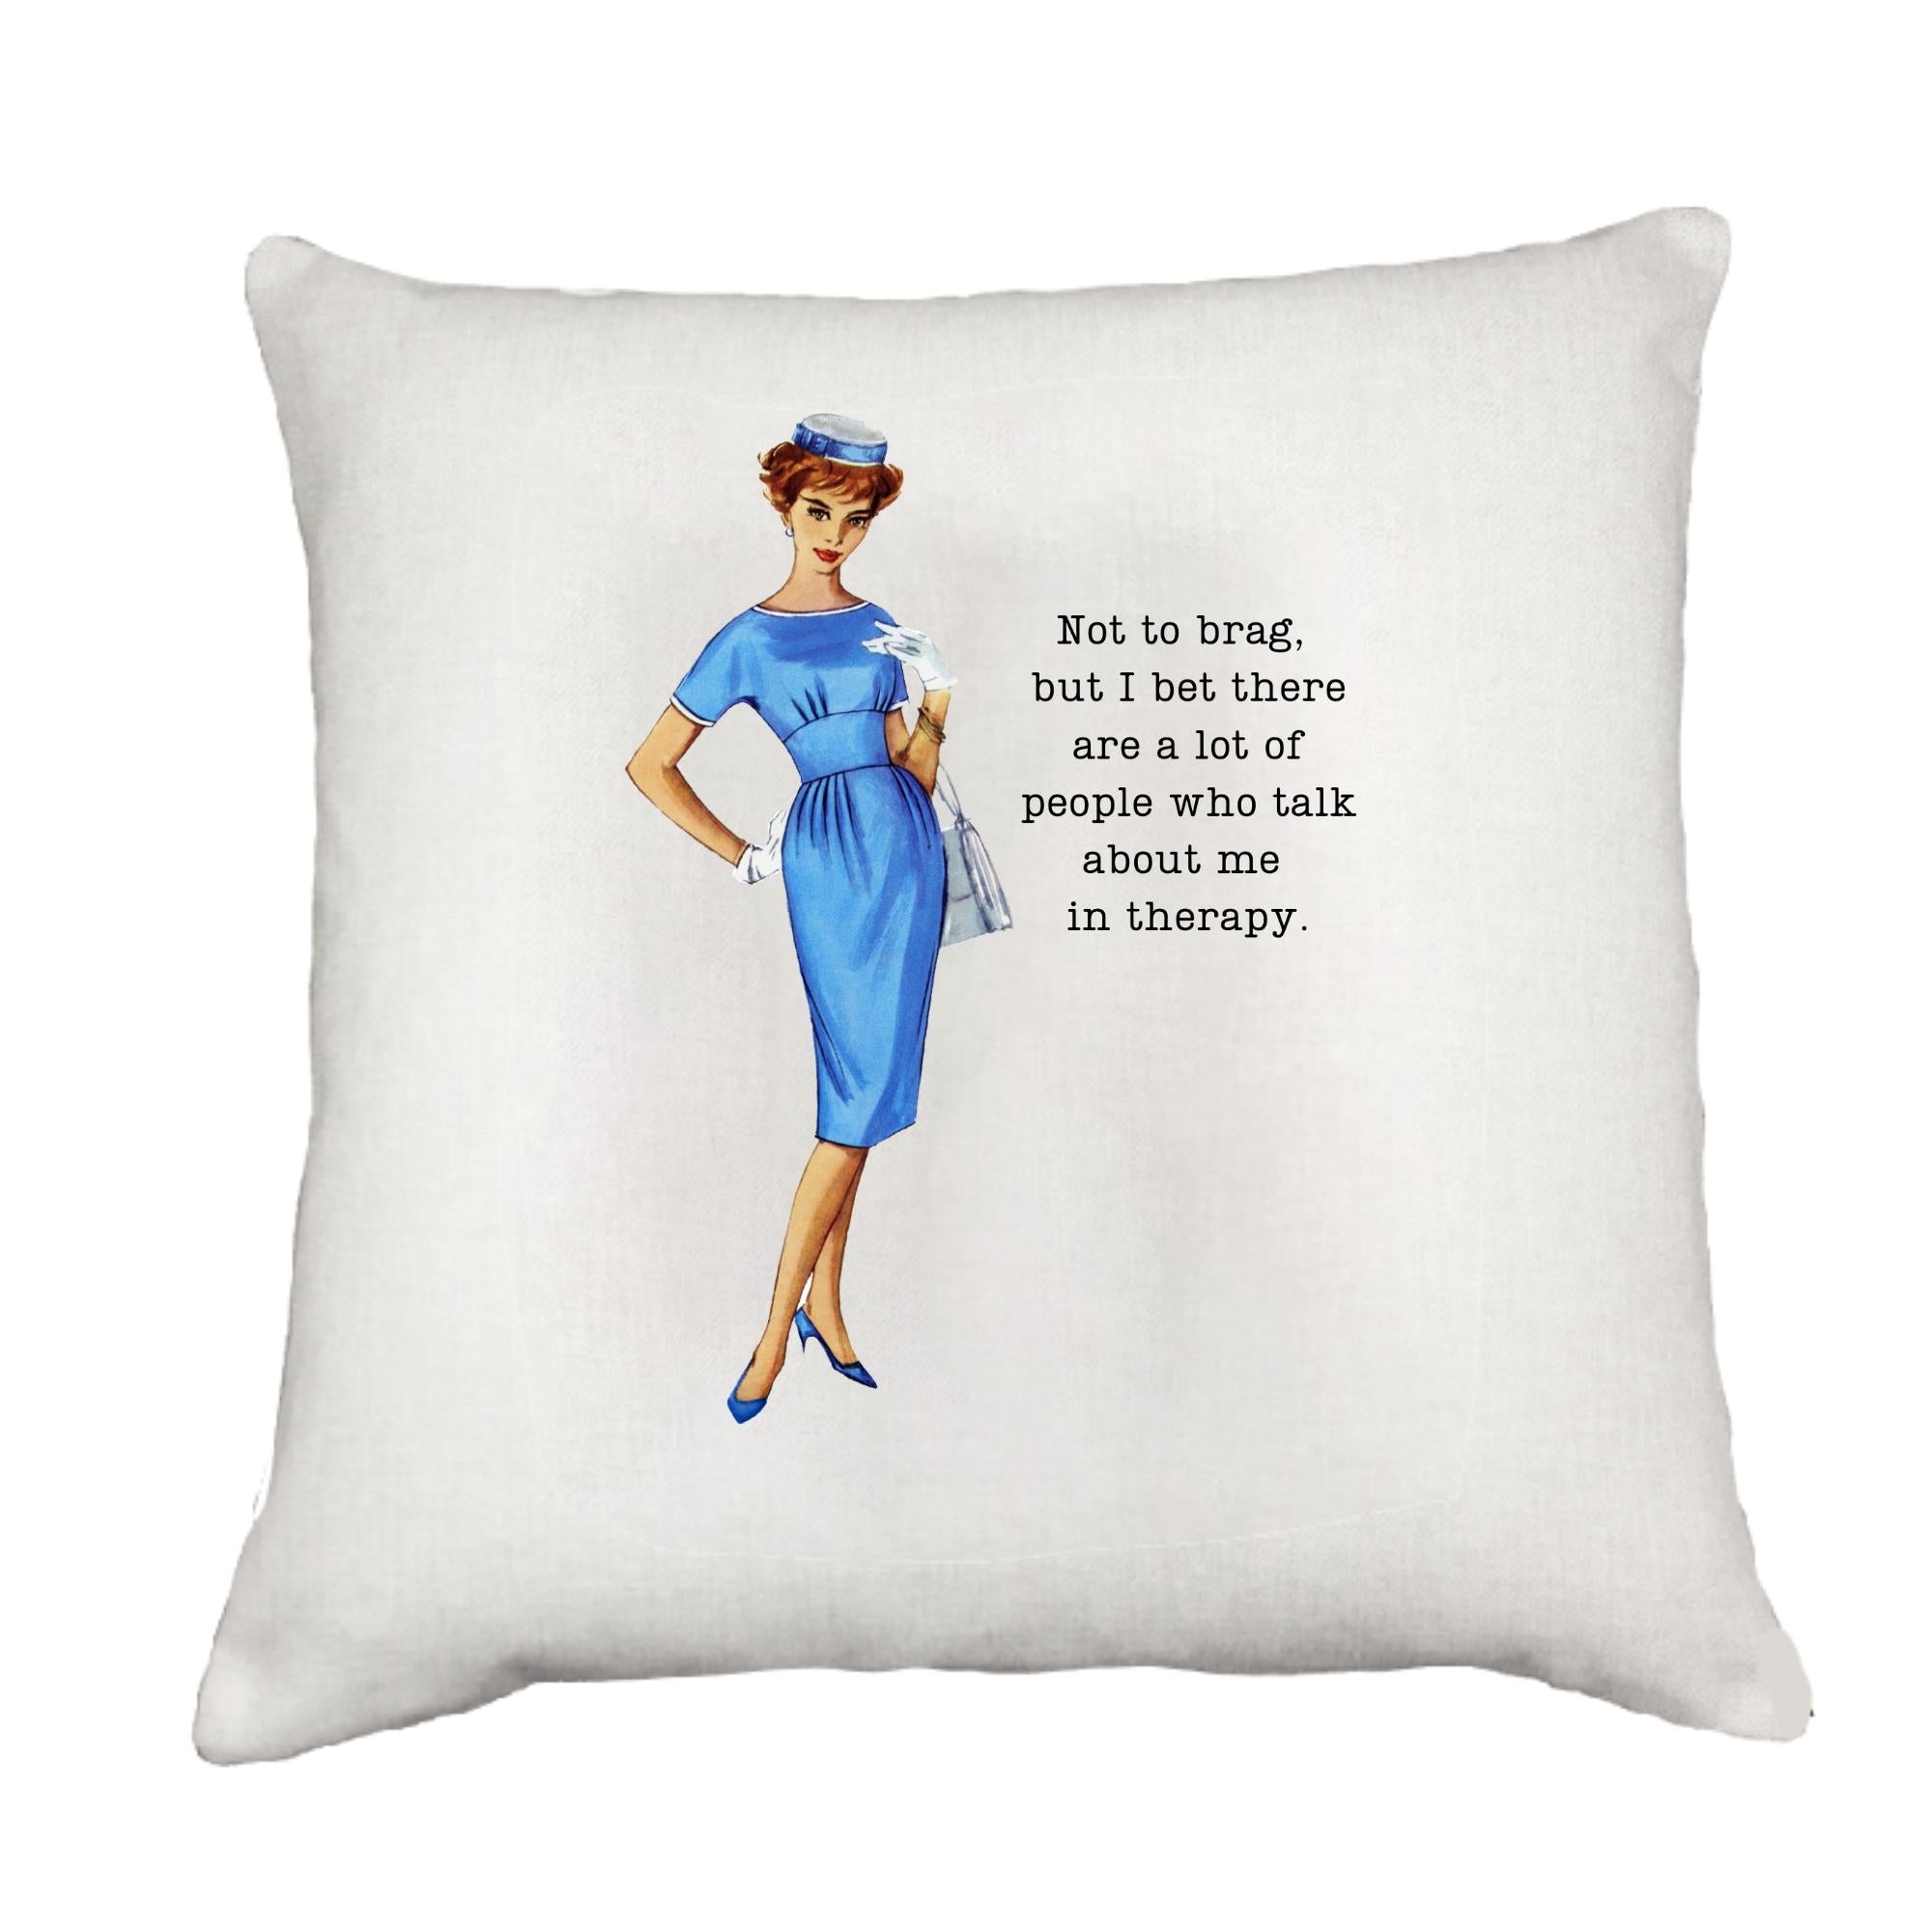 Not To Brag Cottage Pillow Throw/Decorative Pillow - Southern Sisters